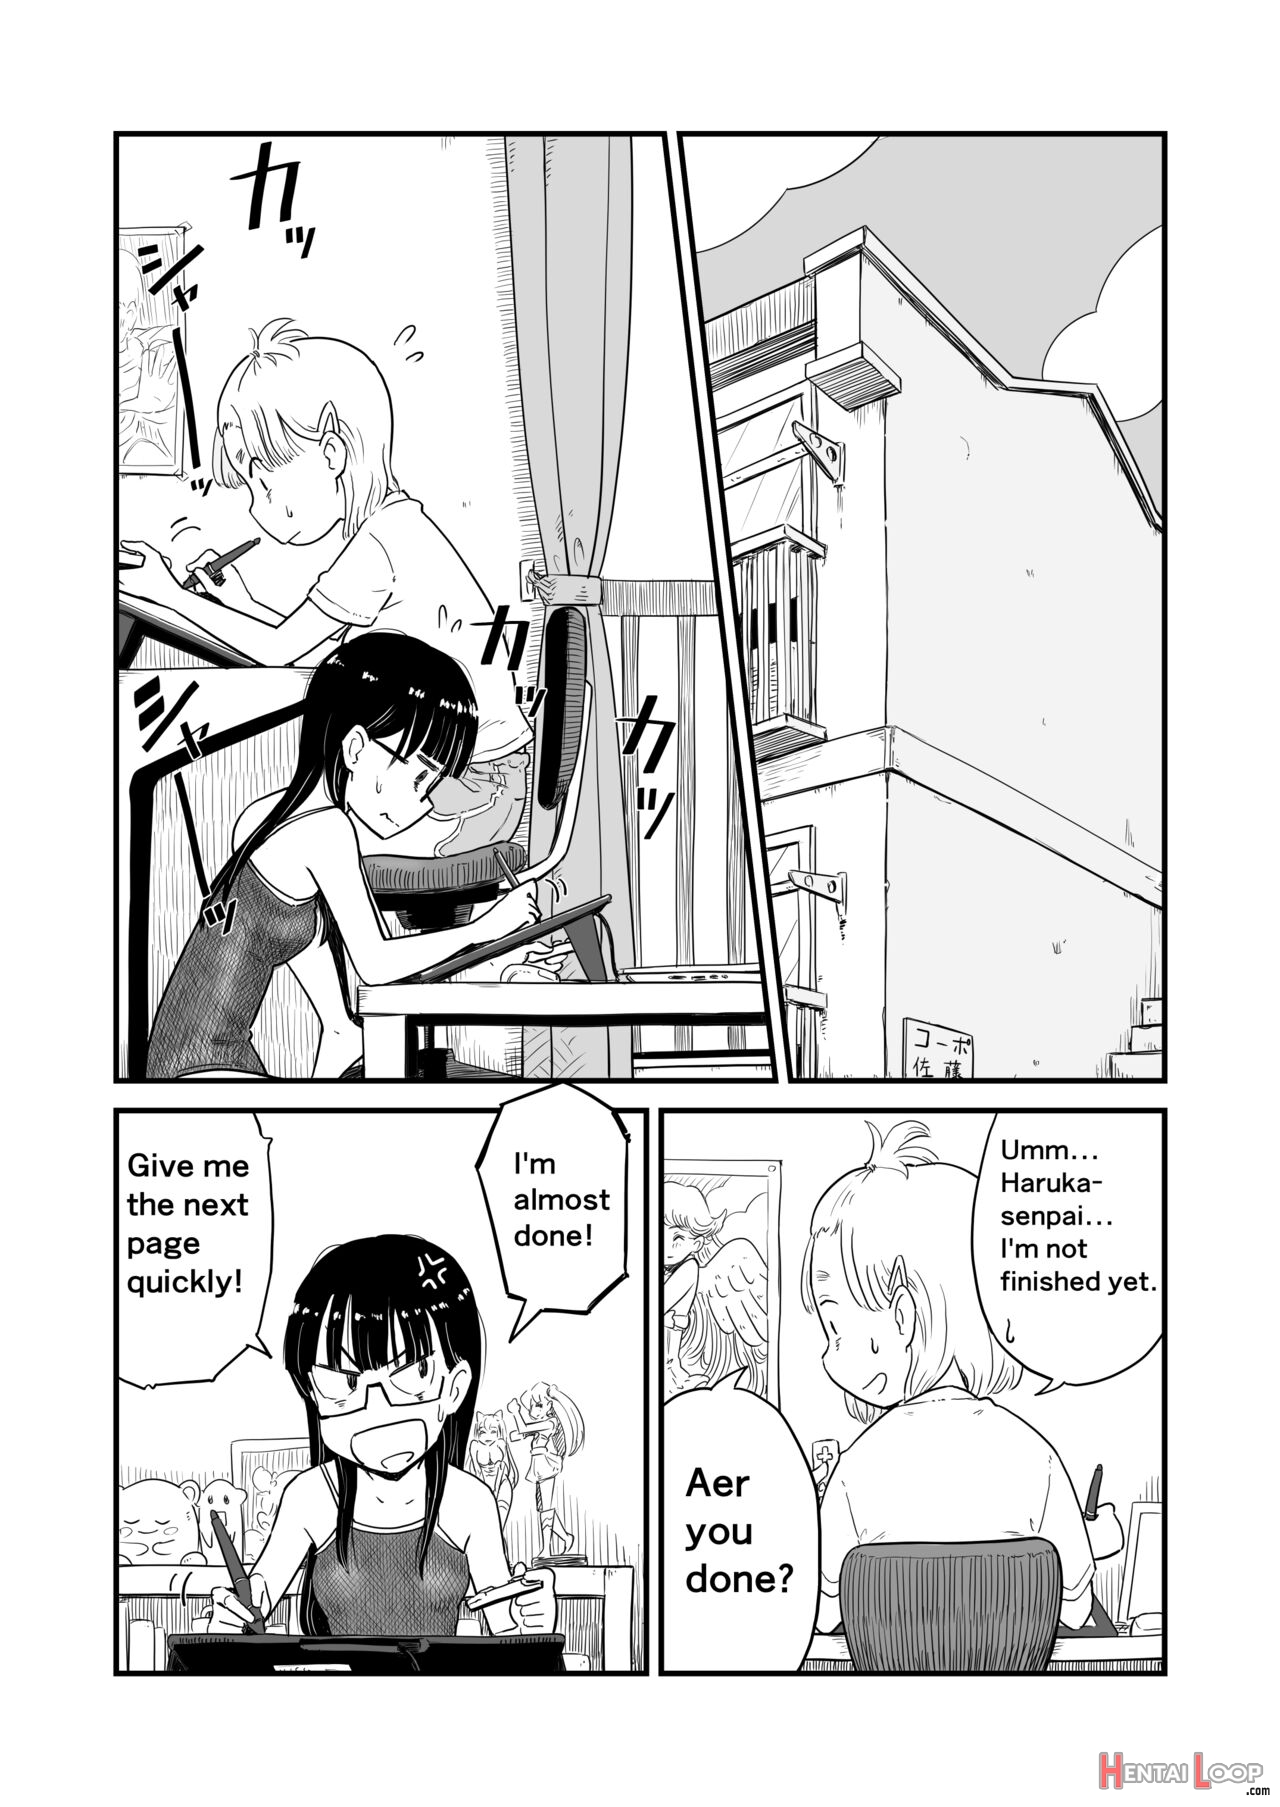 My Sister Is A Doujinshi Artist Of One-shota. page 2